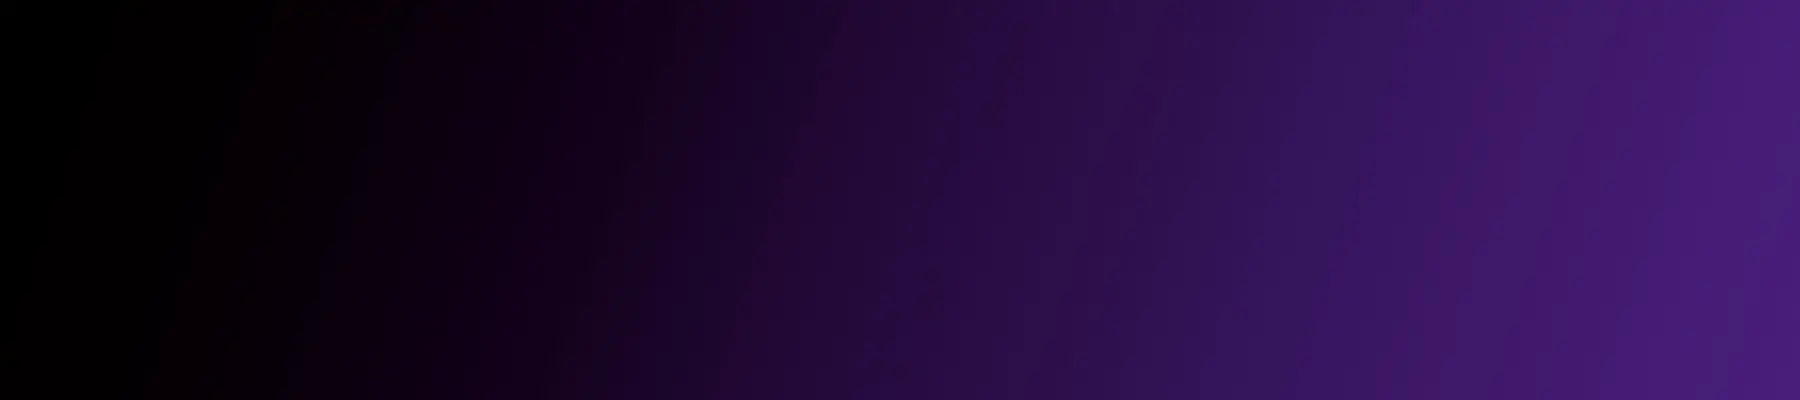 Background Gradient Image That Transitions from Black to Purple